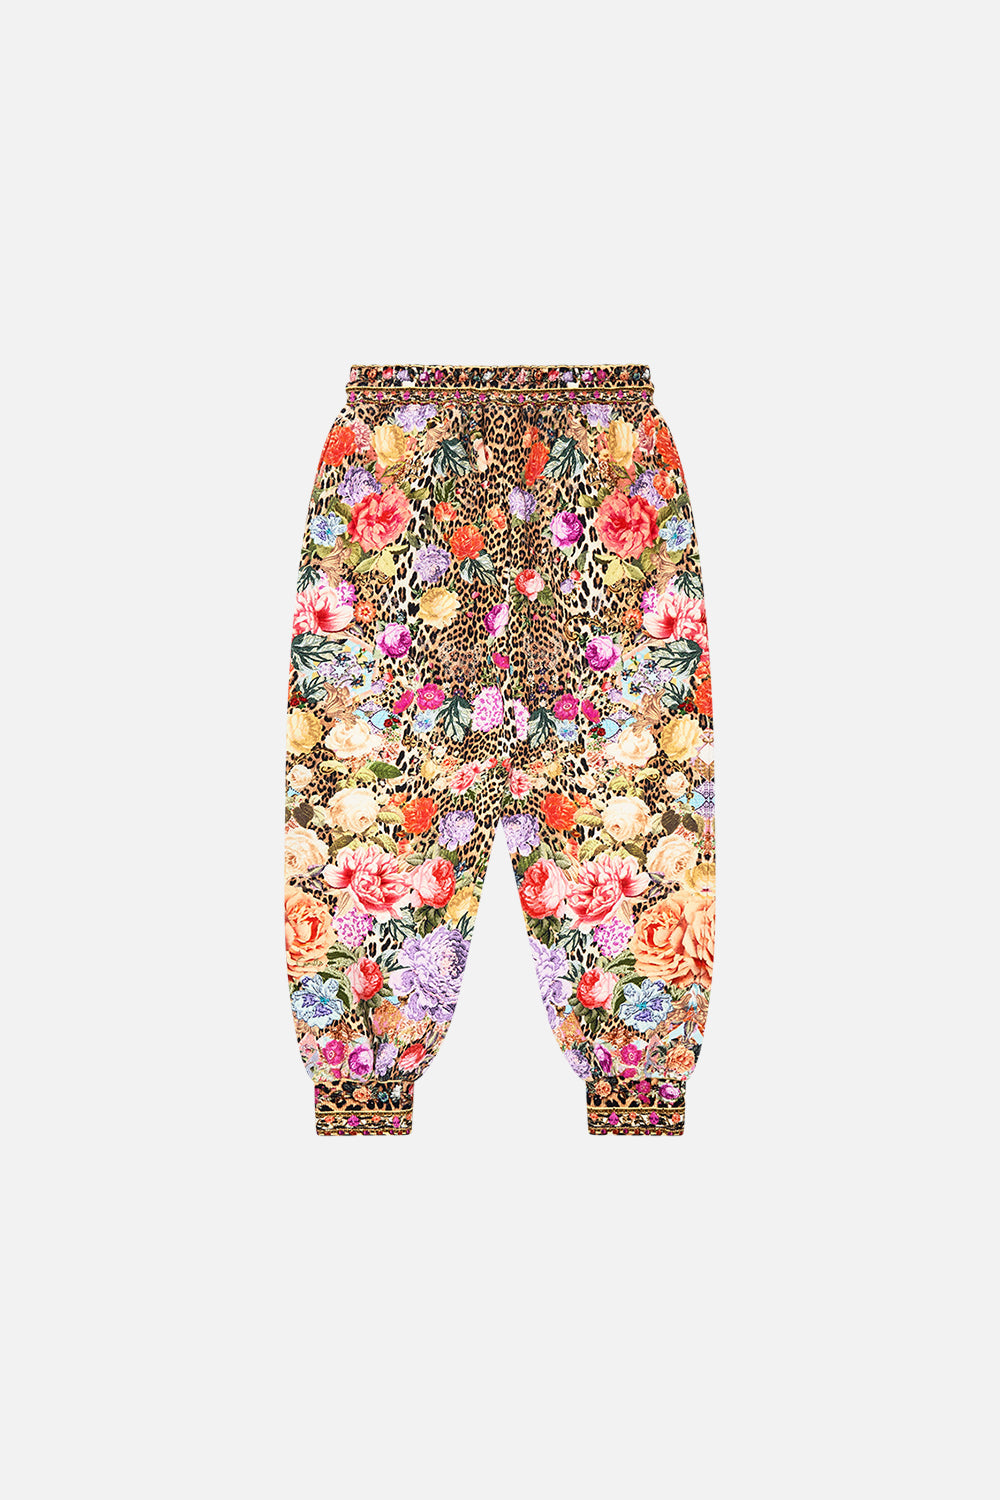 Milla by CAMILLA floral relaxed track pant (4-10) in Heirloom Anthem